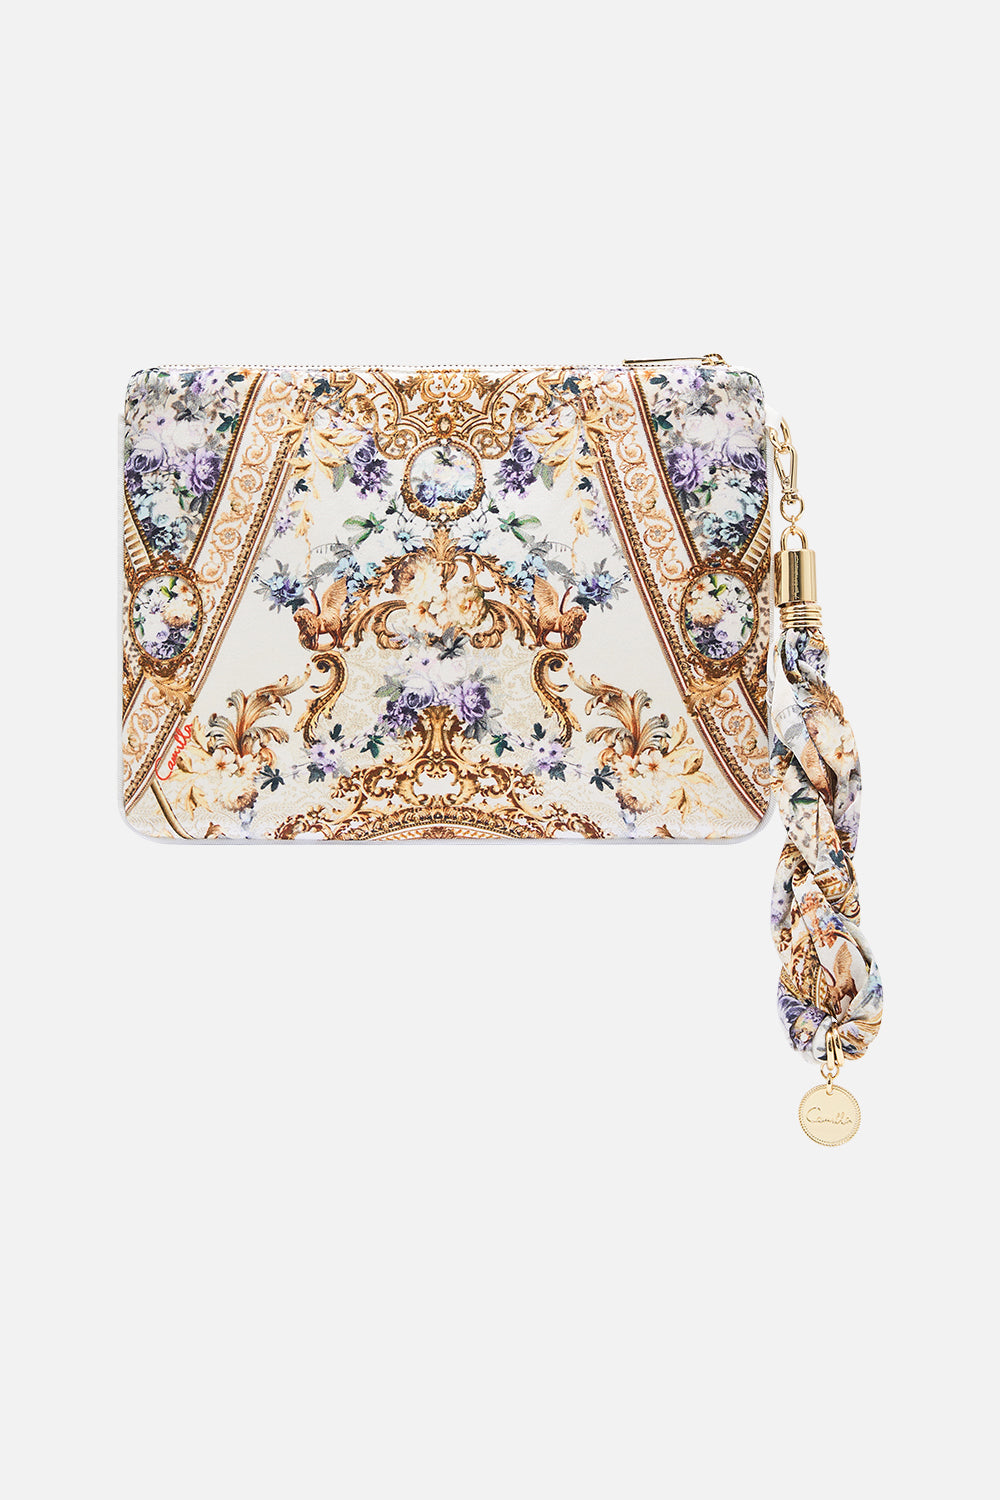 Product view of CAMILLA evening silk clutch bag in Palazzo playdate print  